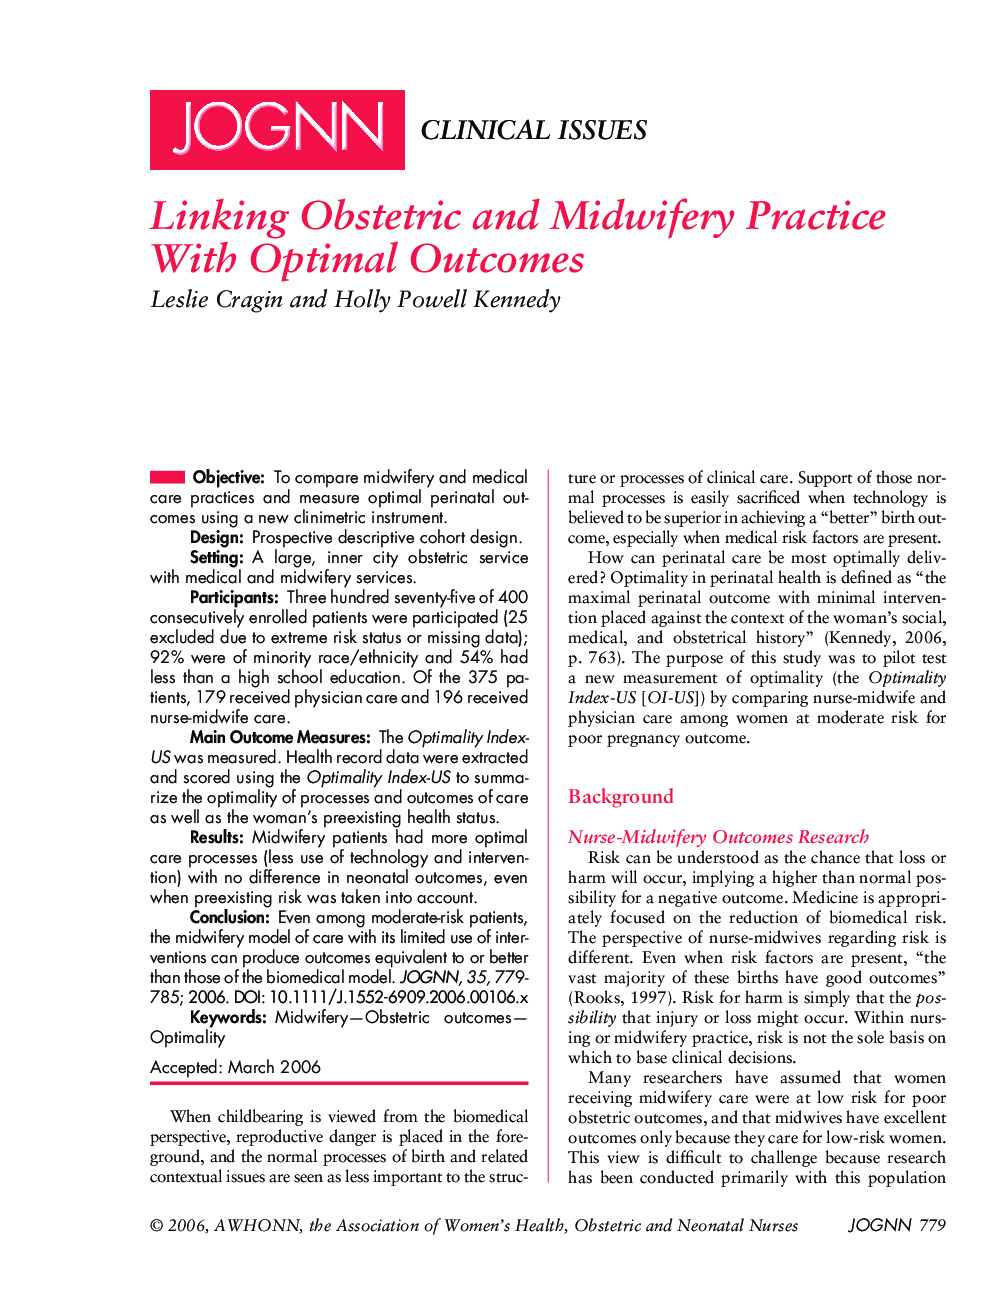 Linking Obstetric and Midwifery Practice With Optimal Outcomes